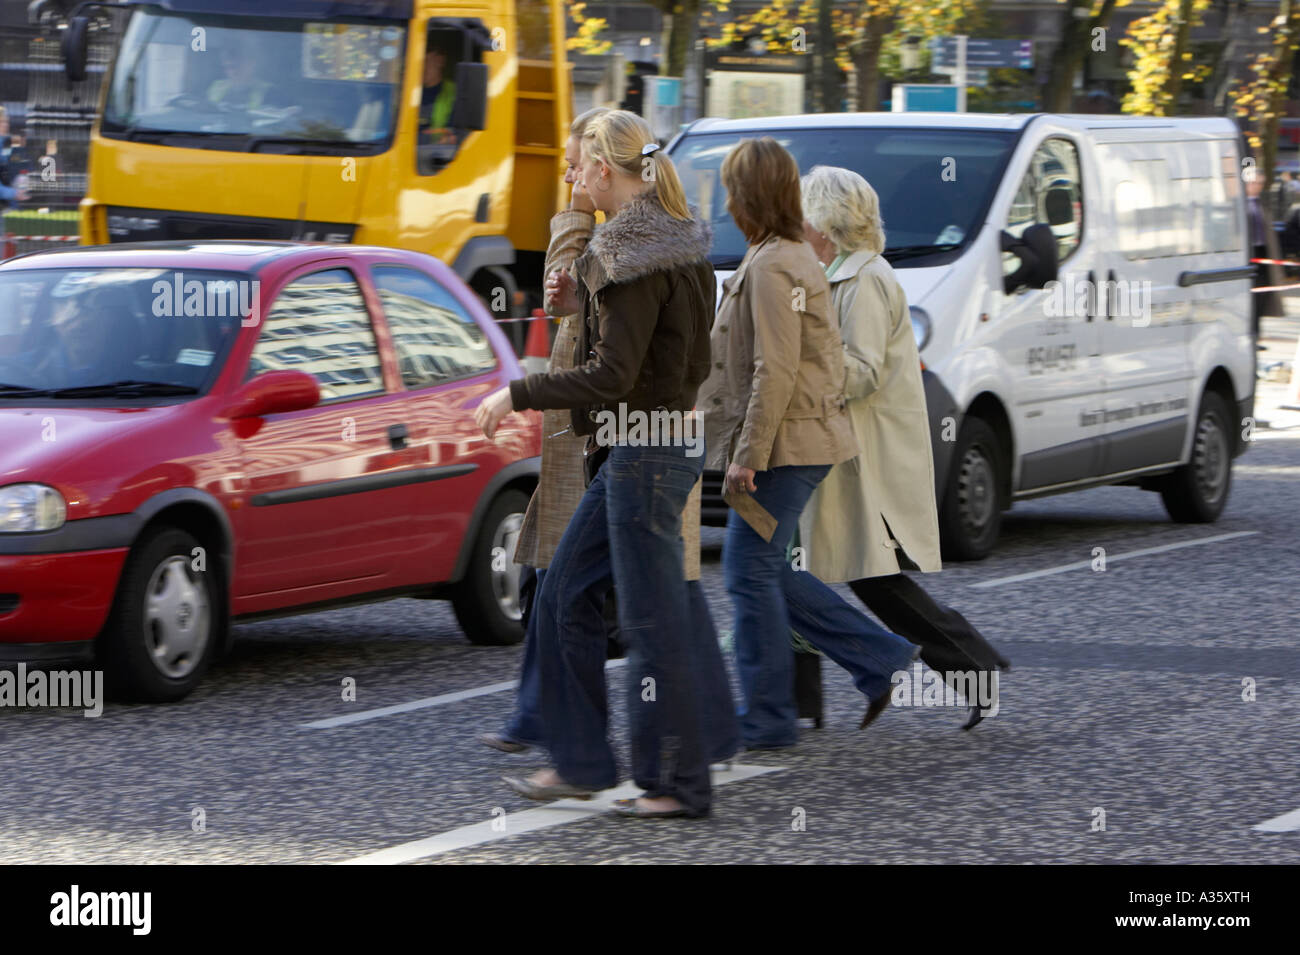 crowd of people women walking across the road through traffic in the middle of a road in a city centre Stock Photo